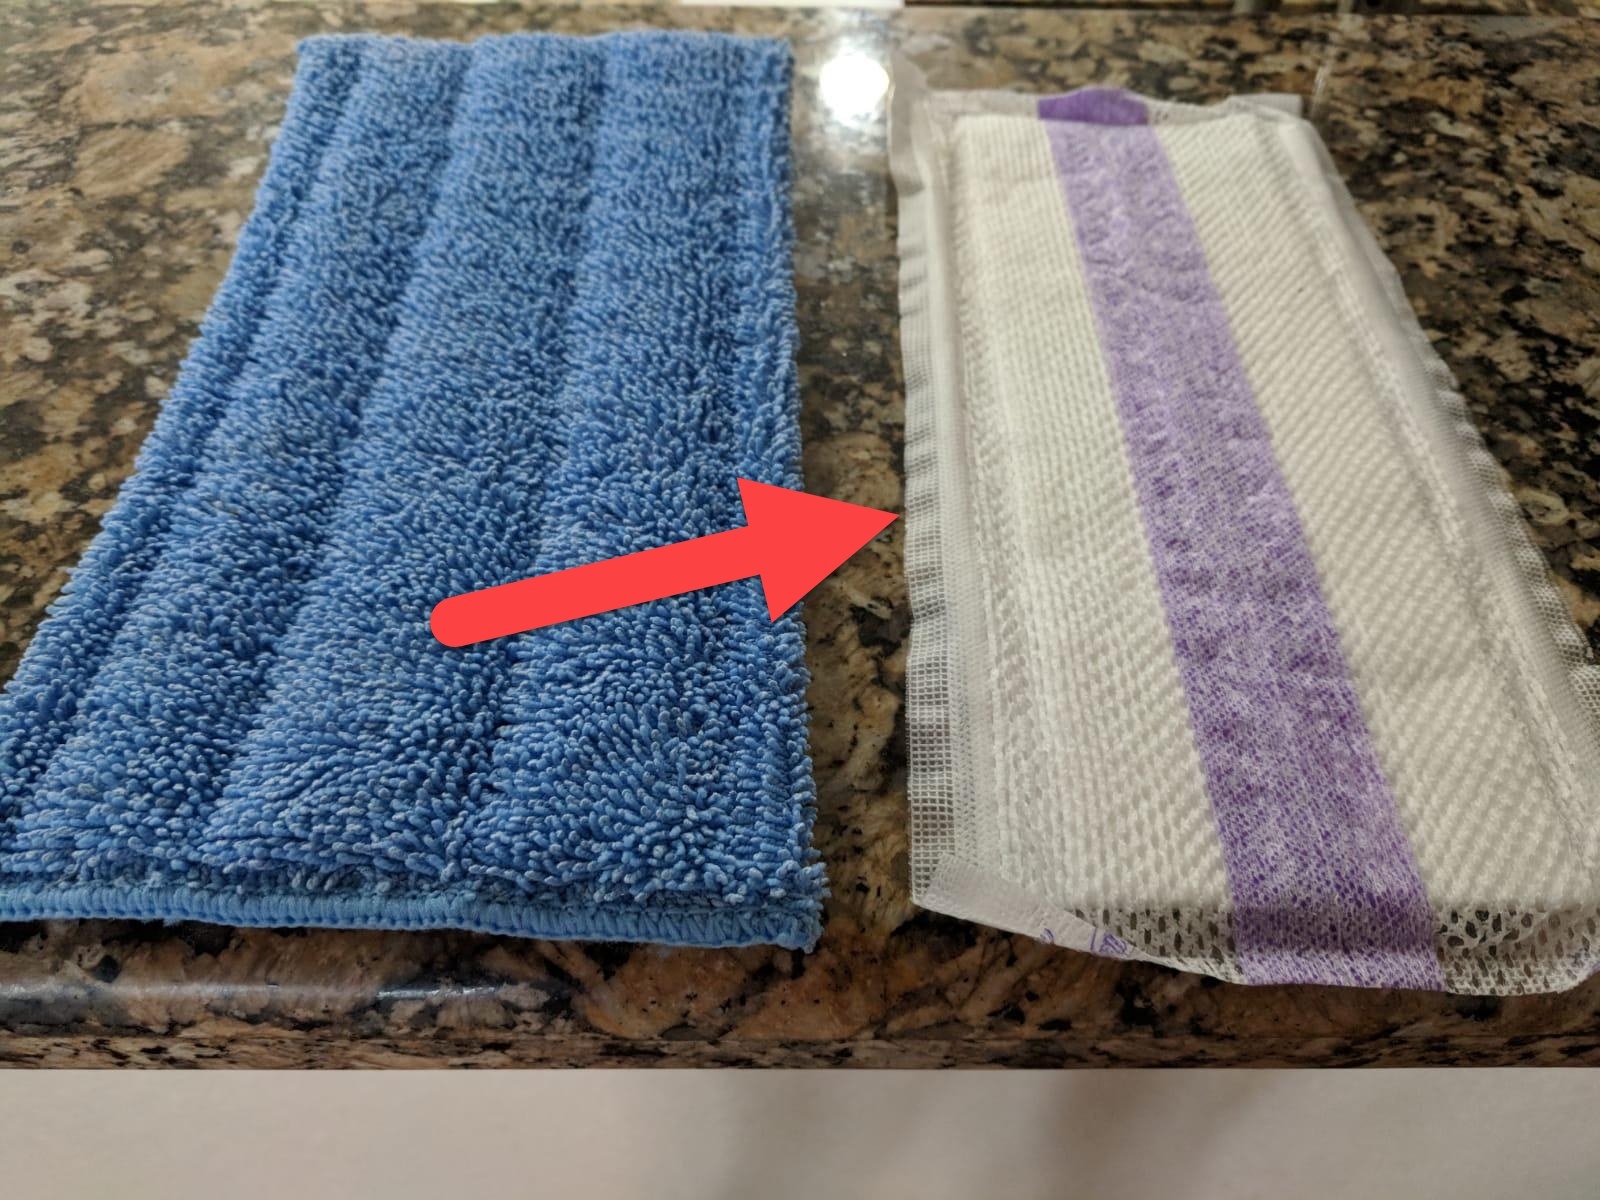 A close-up of two pads, one (left) is reusable and the other (right) is disposable